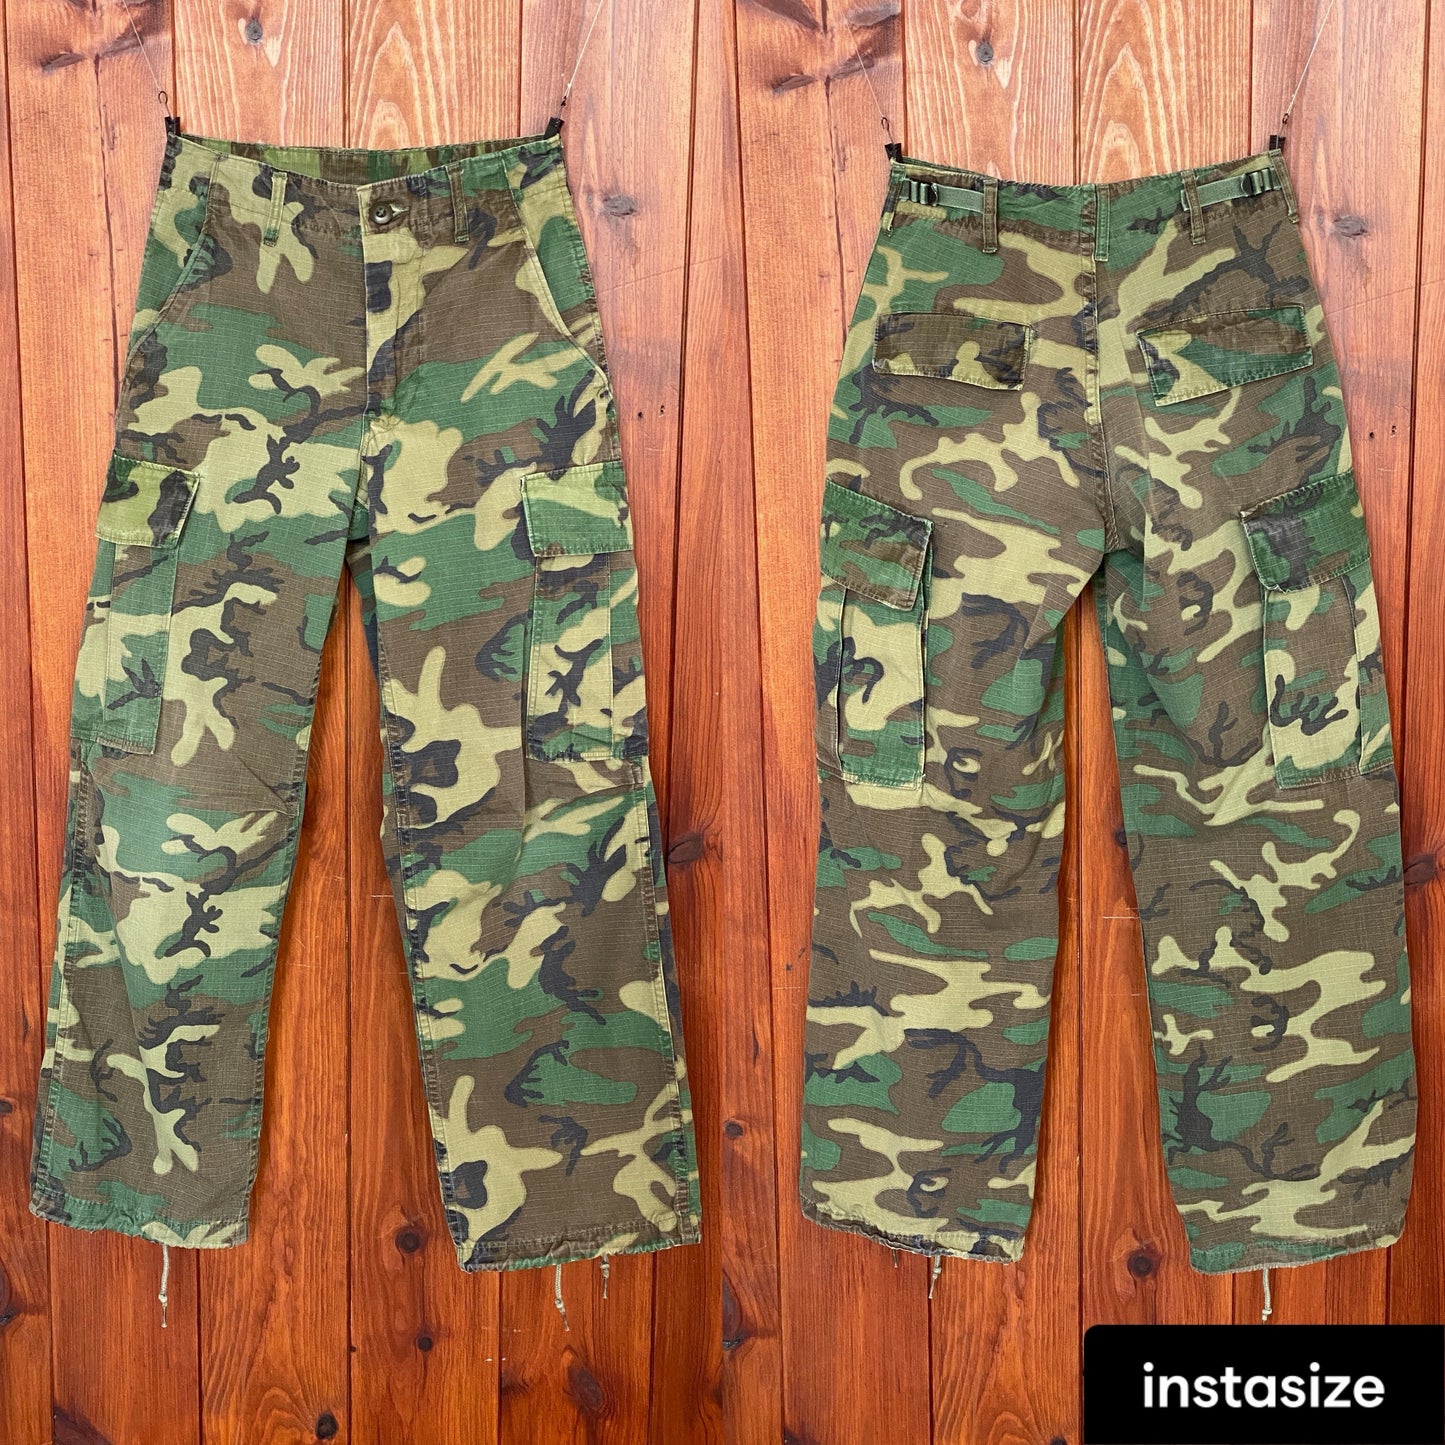 X Small Short . Authentic US Army 1969  camouflage jungle pants.